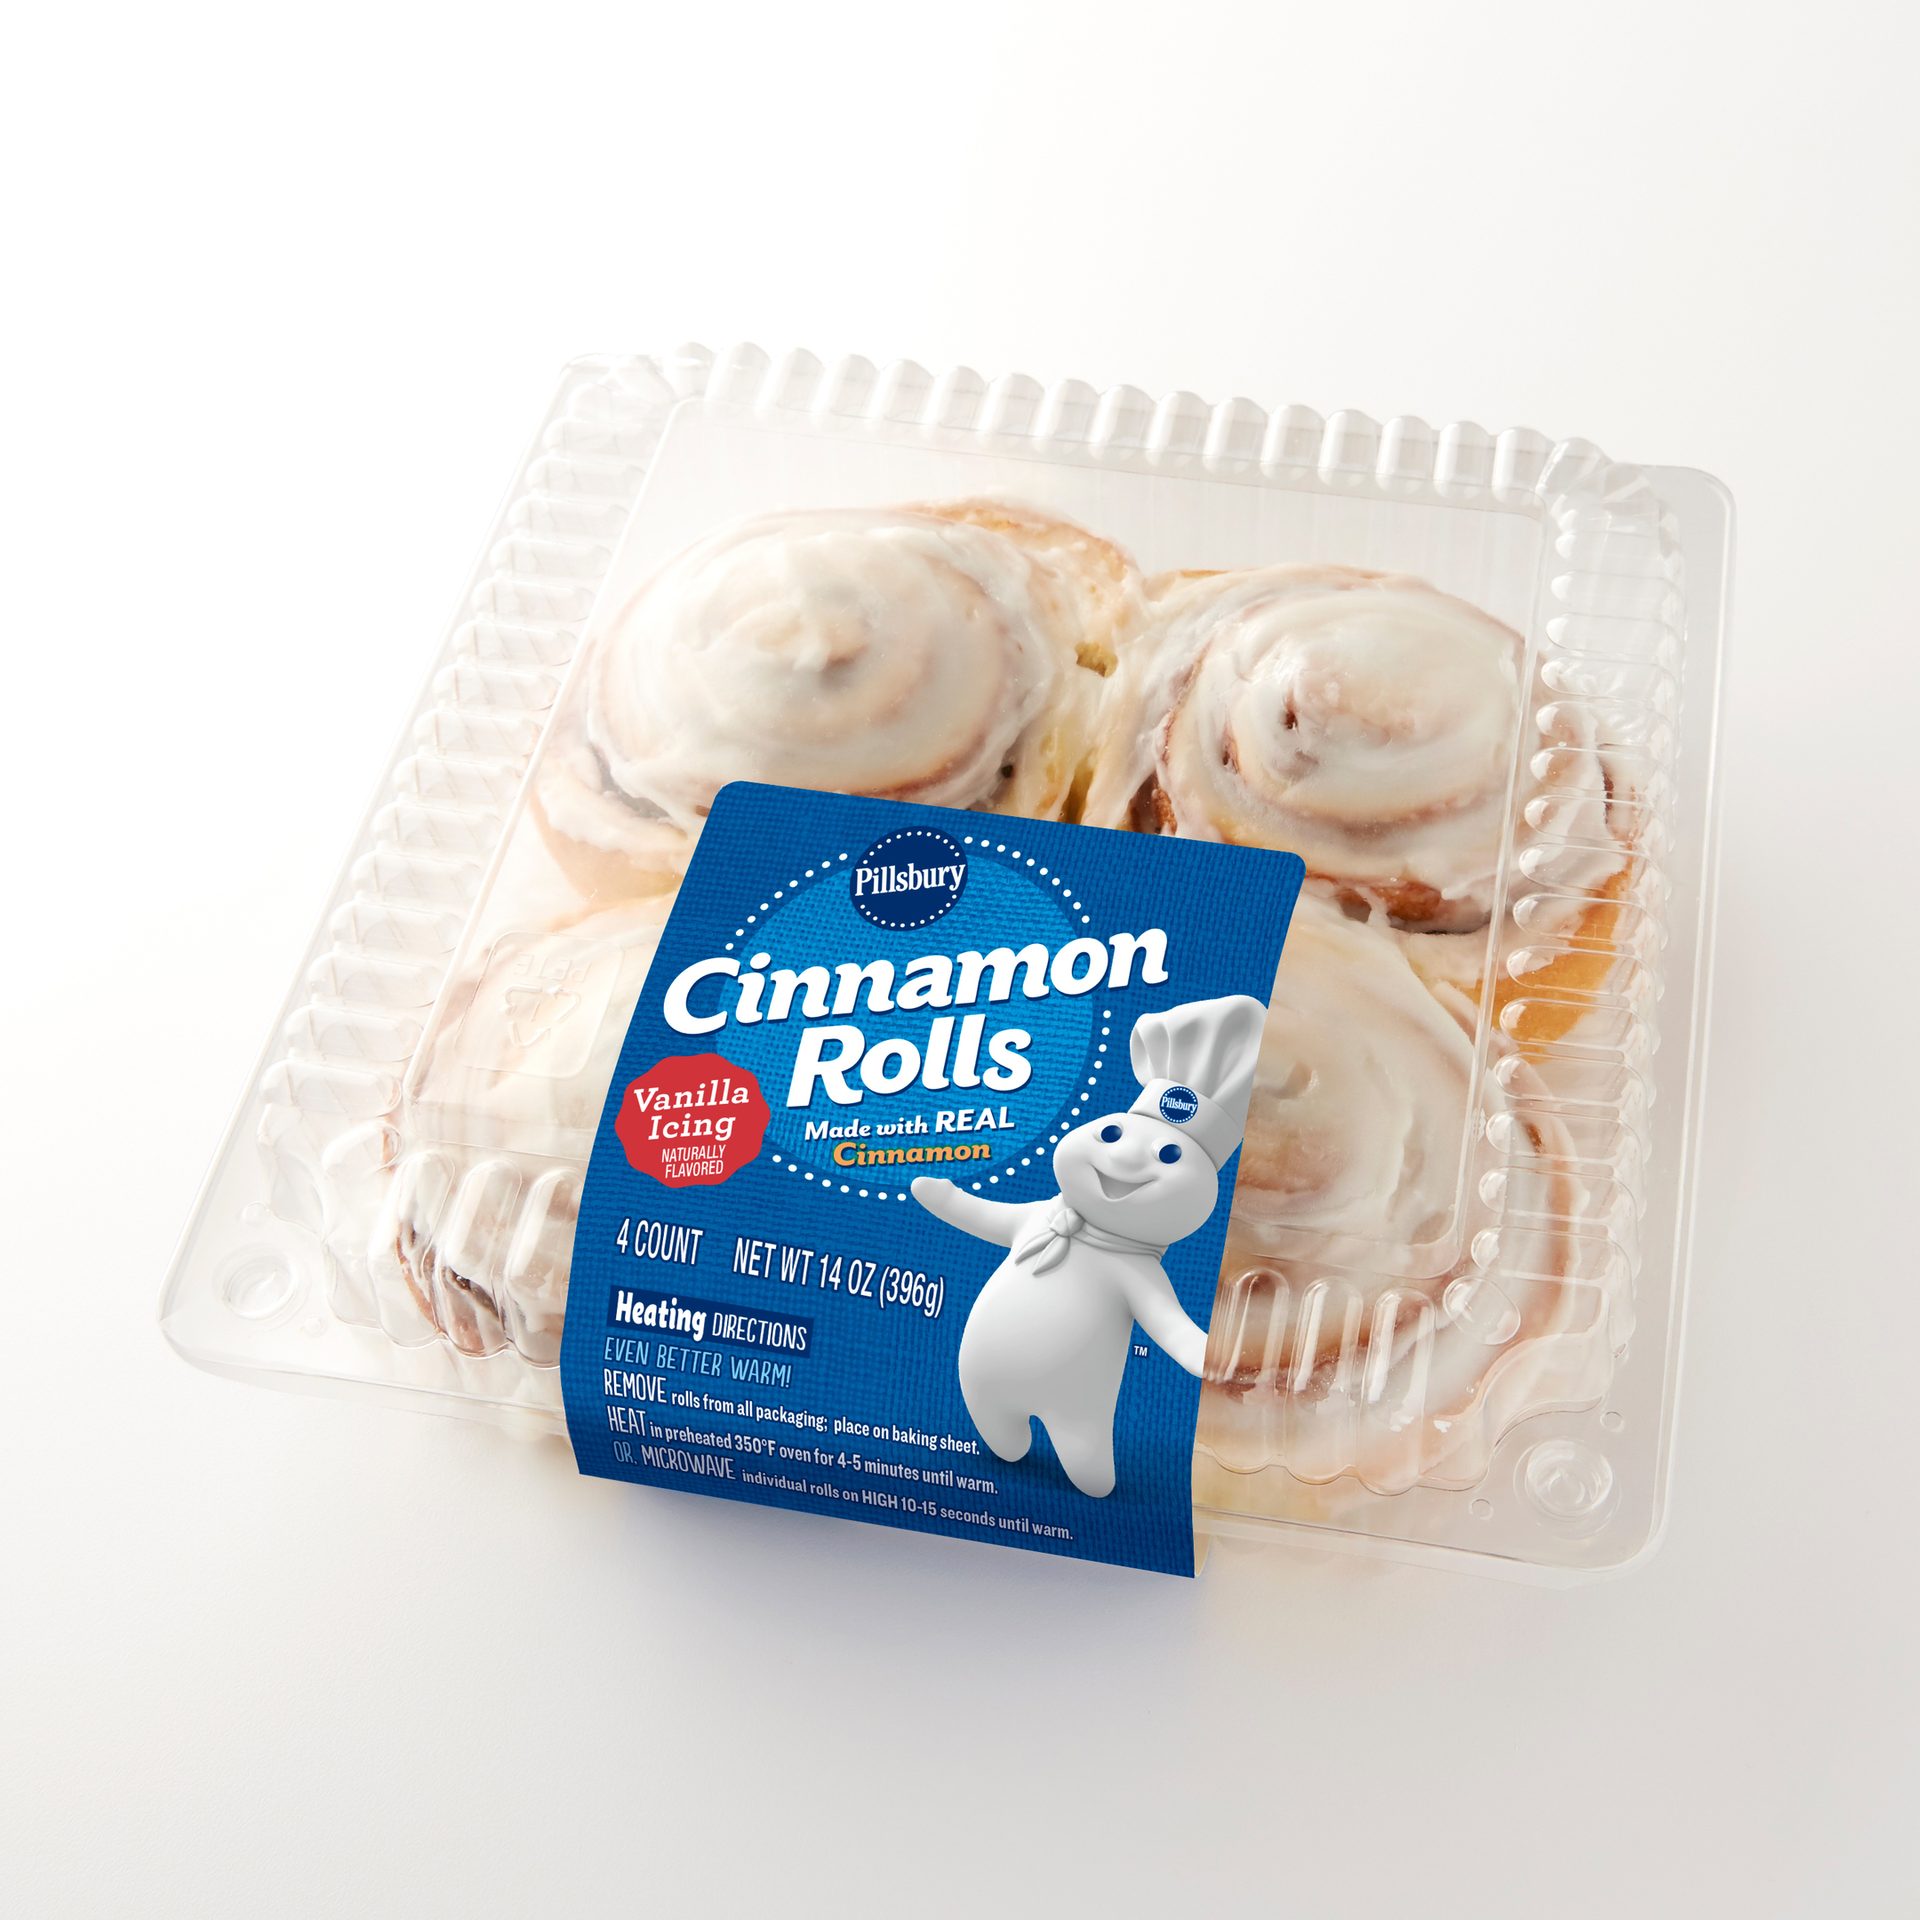 Cinnamon rolls, Clamshell package, Blue label